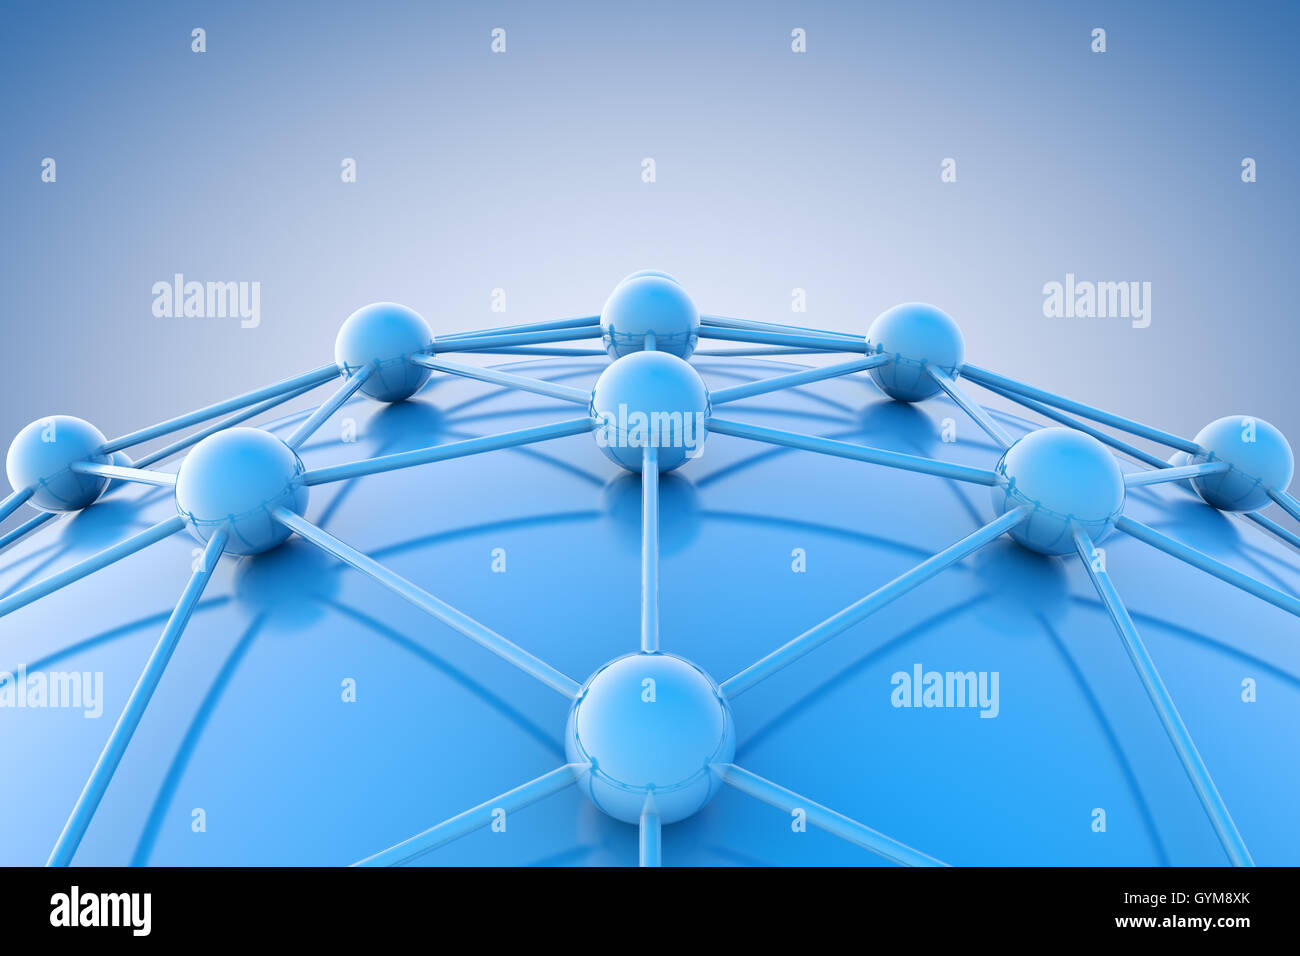 Networking concept Stock Photo